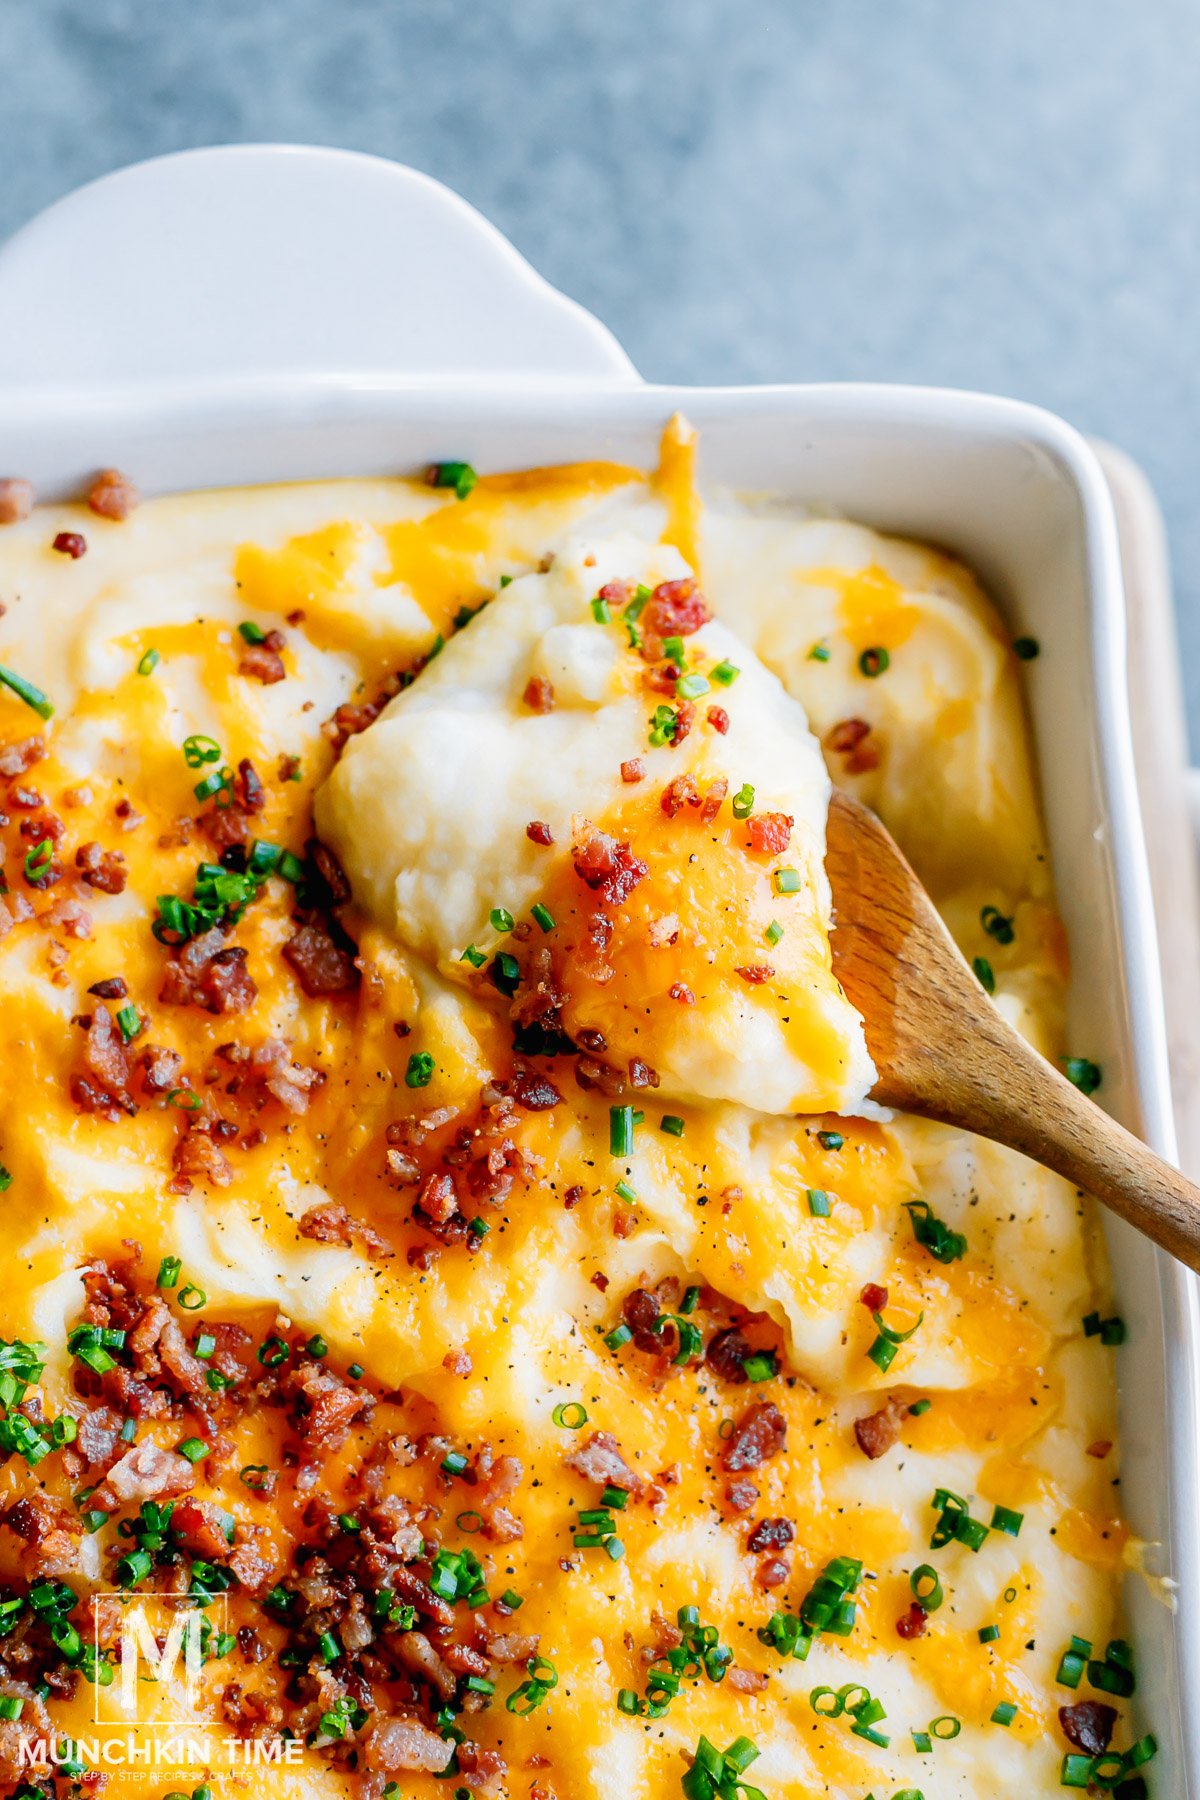 A scoop of baked mashed potato casserole garnish with cheese, bacon pieces and chives.